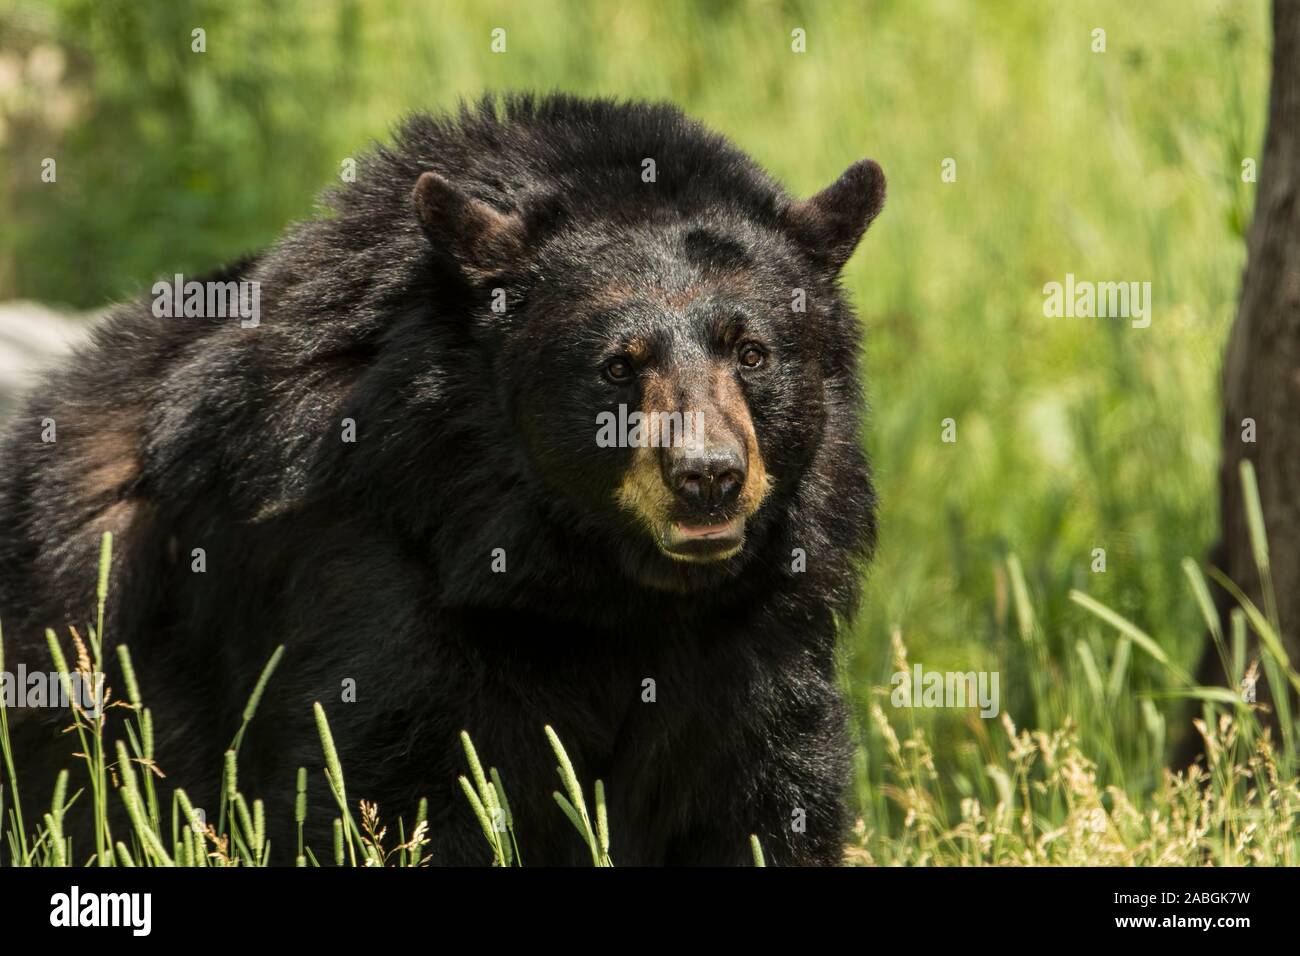 A Black bear is sitting in the green grass. Stock Photo